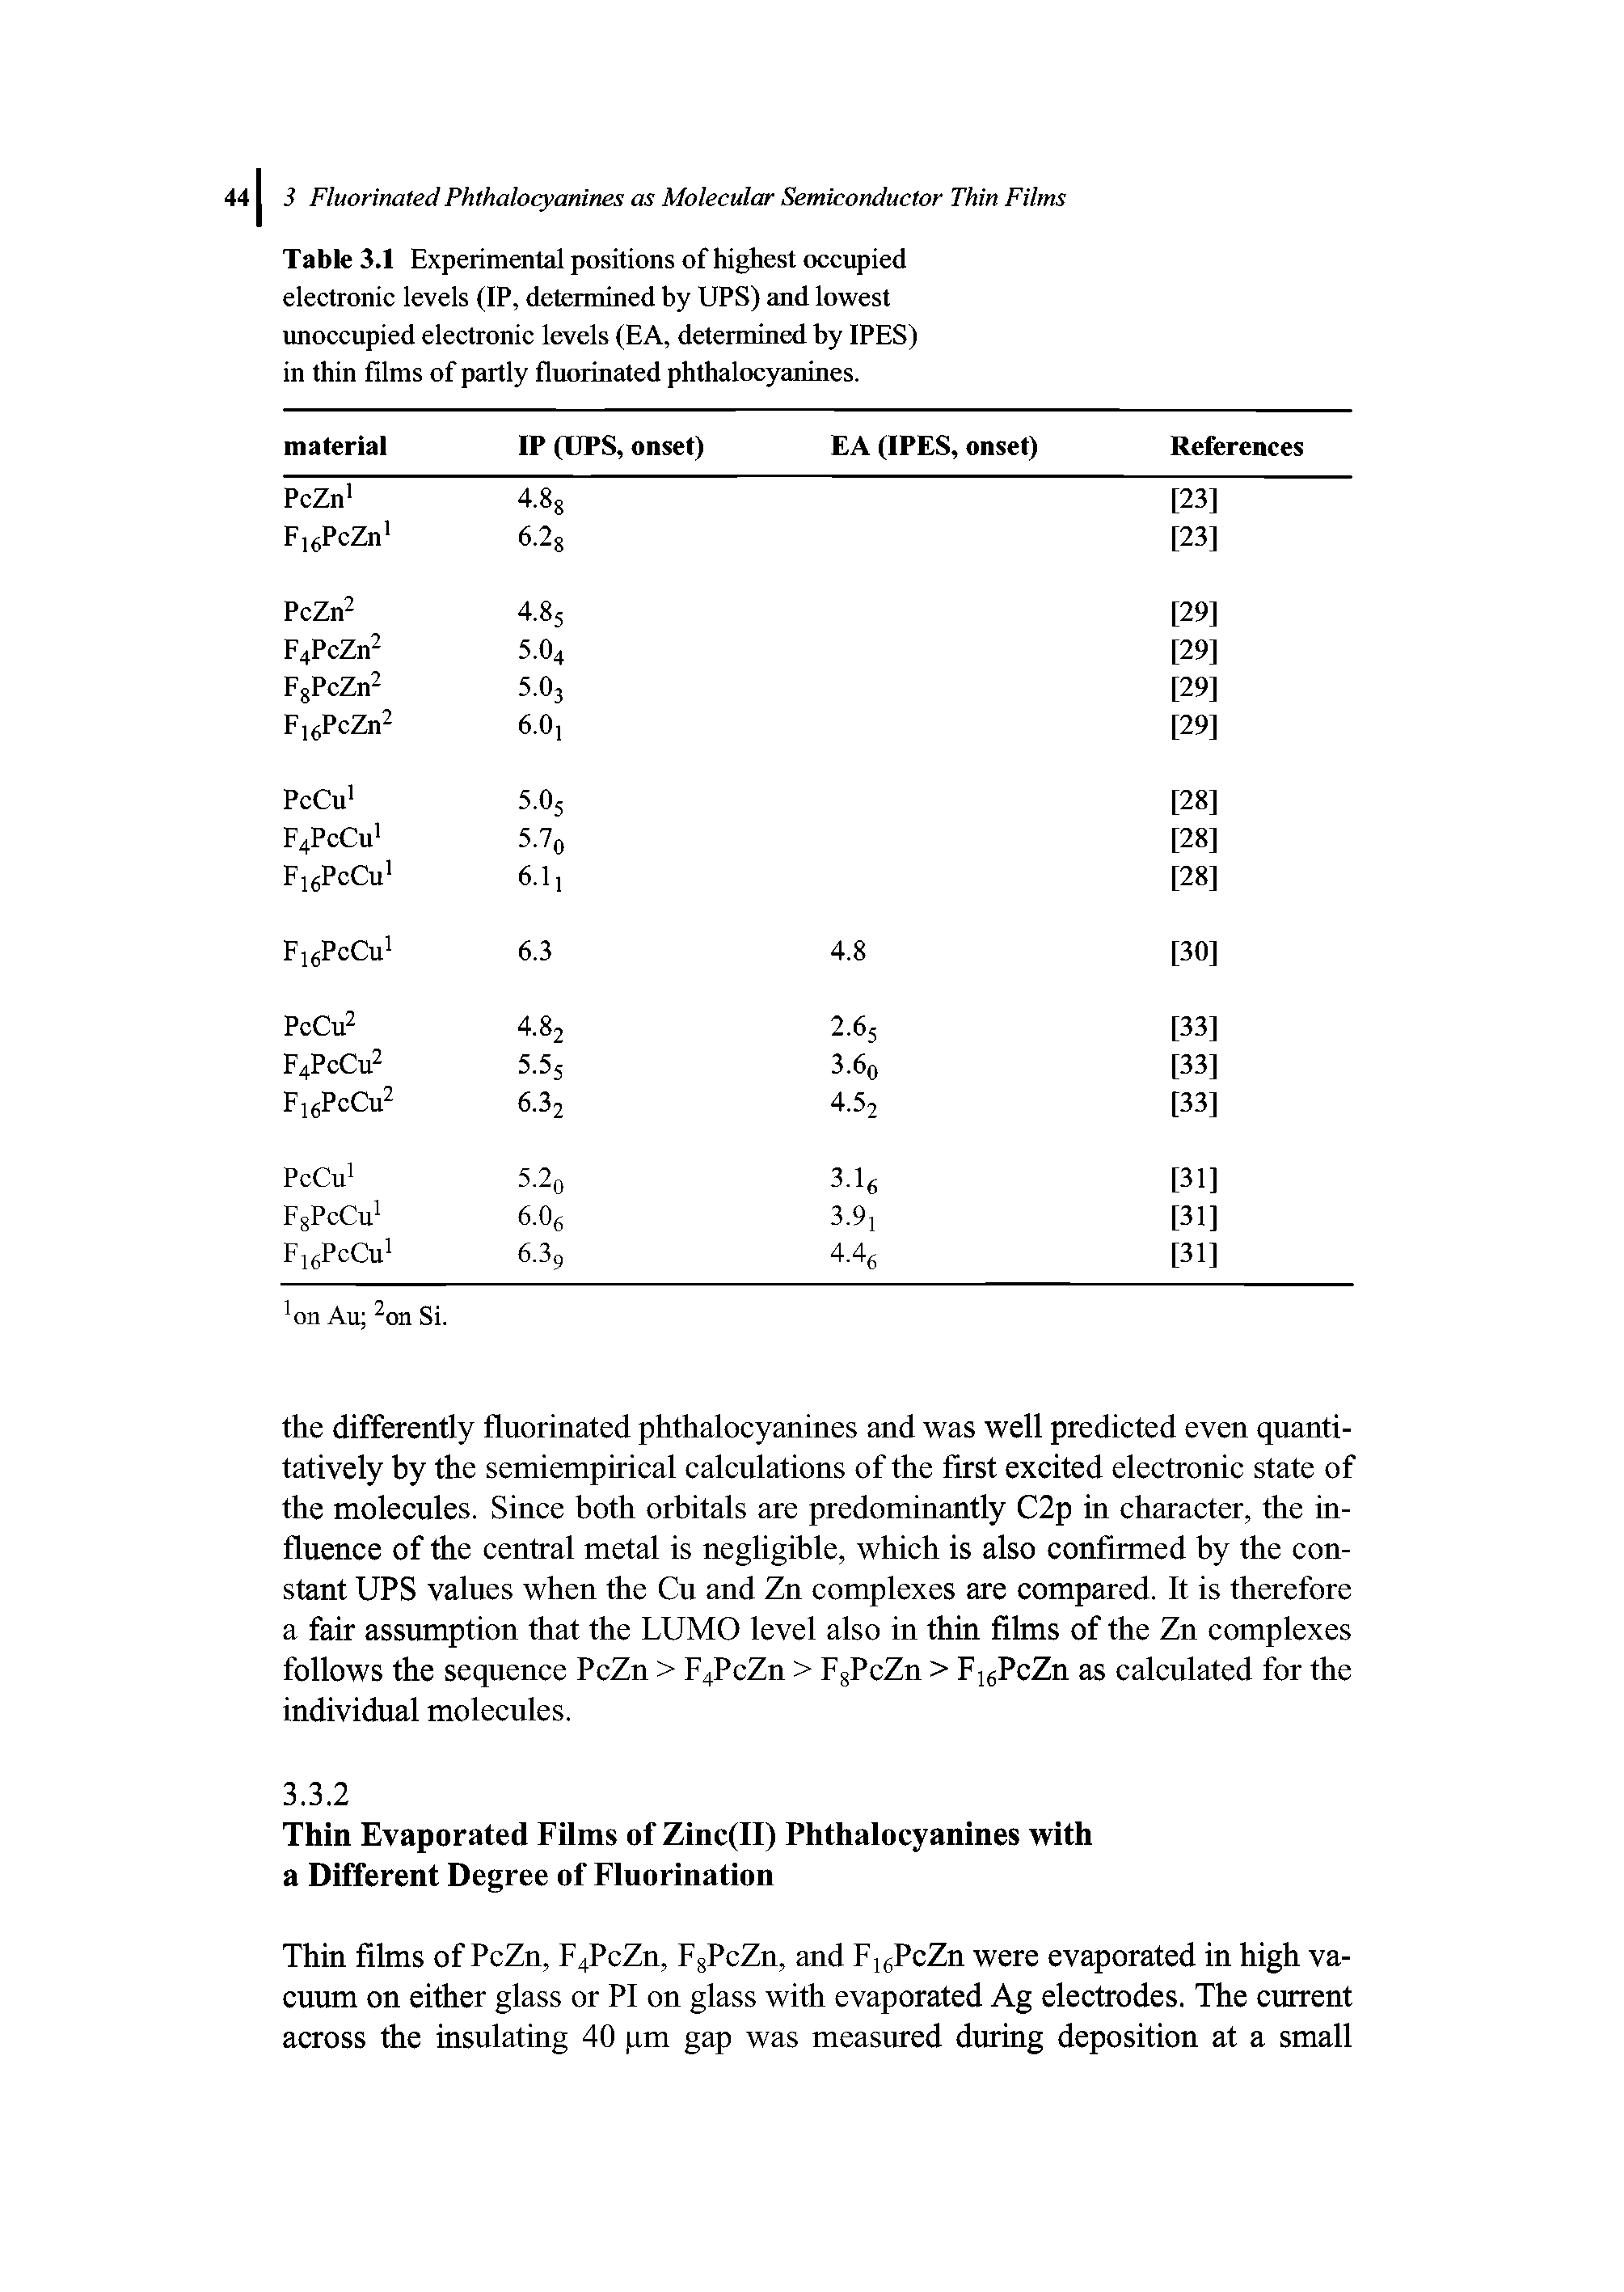 Table 3.1 Experimental positions of highest occupied electronic levels (IP, determined by UPS) and lowest unoccupied electronic levels (EA, determined by IPES) in thin films of partly fluorinated phthalocyanines.